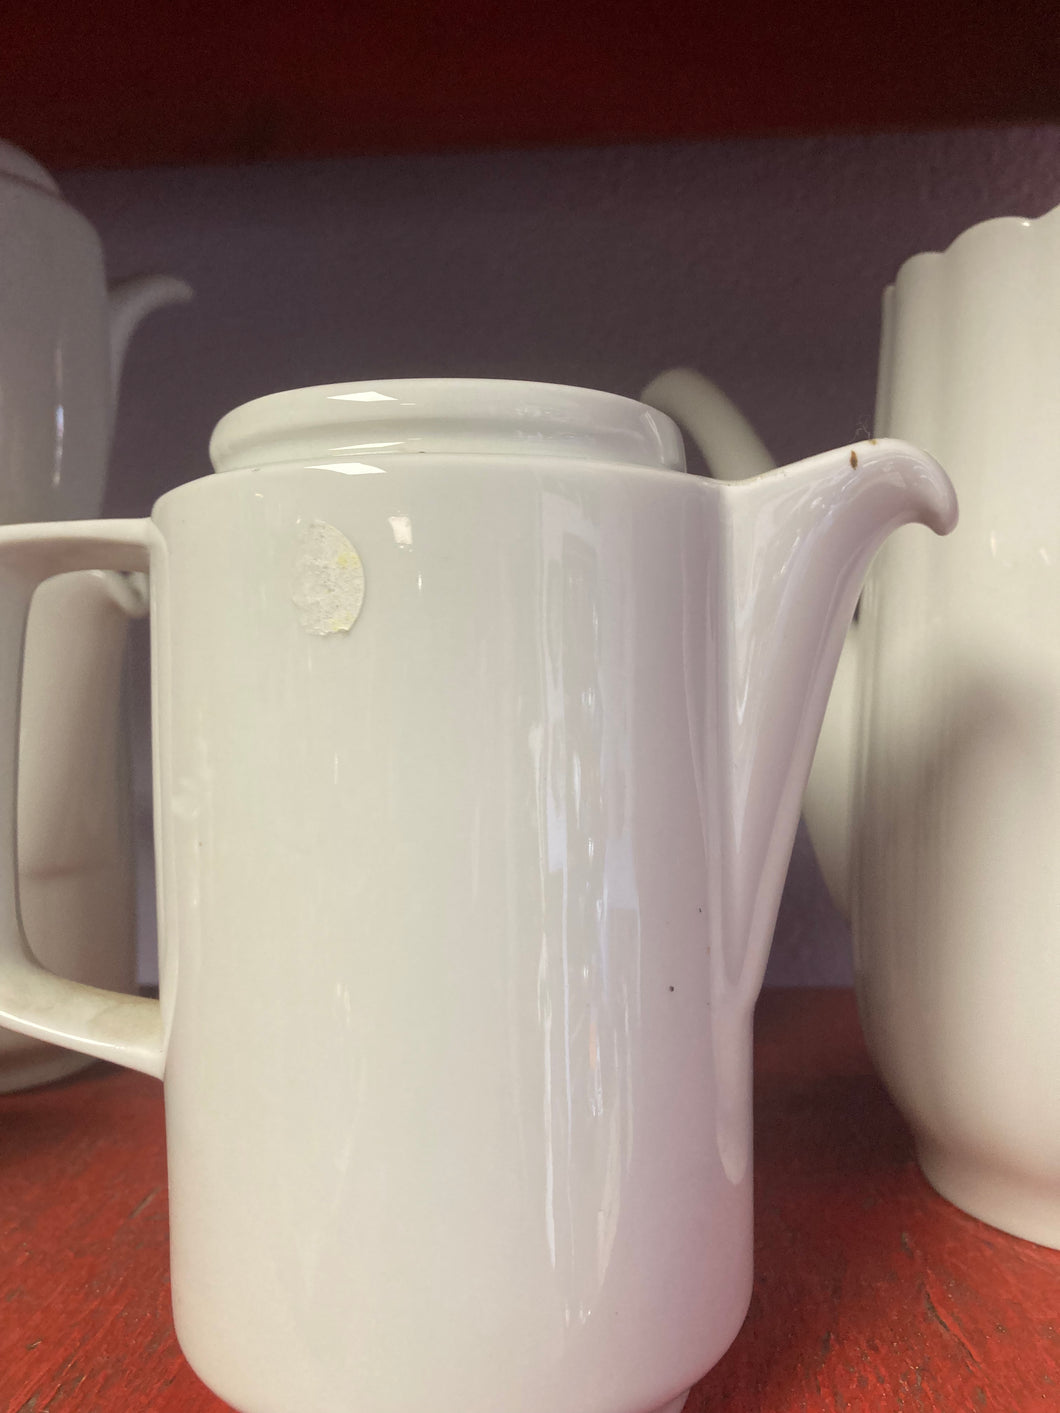 4 cup teapot or coffee pot